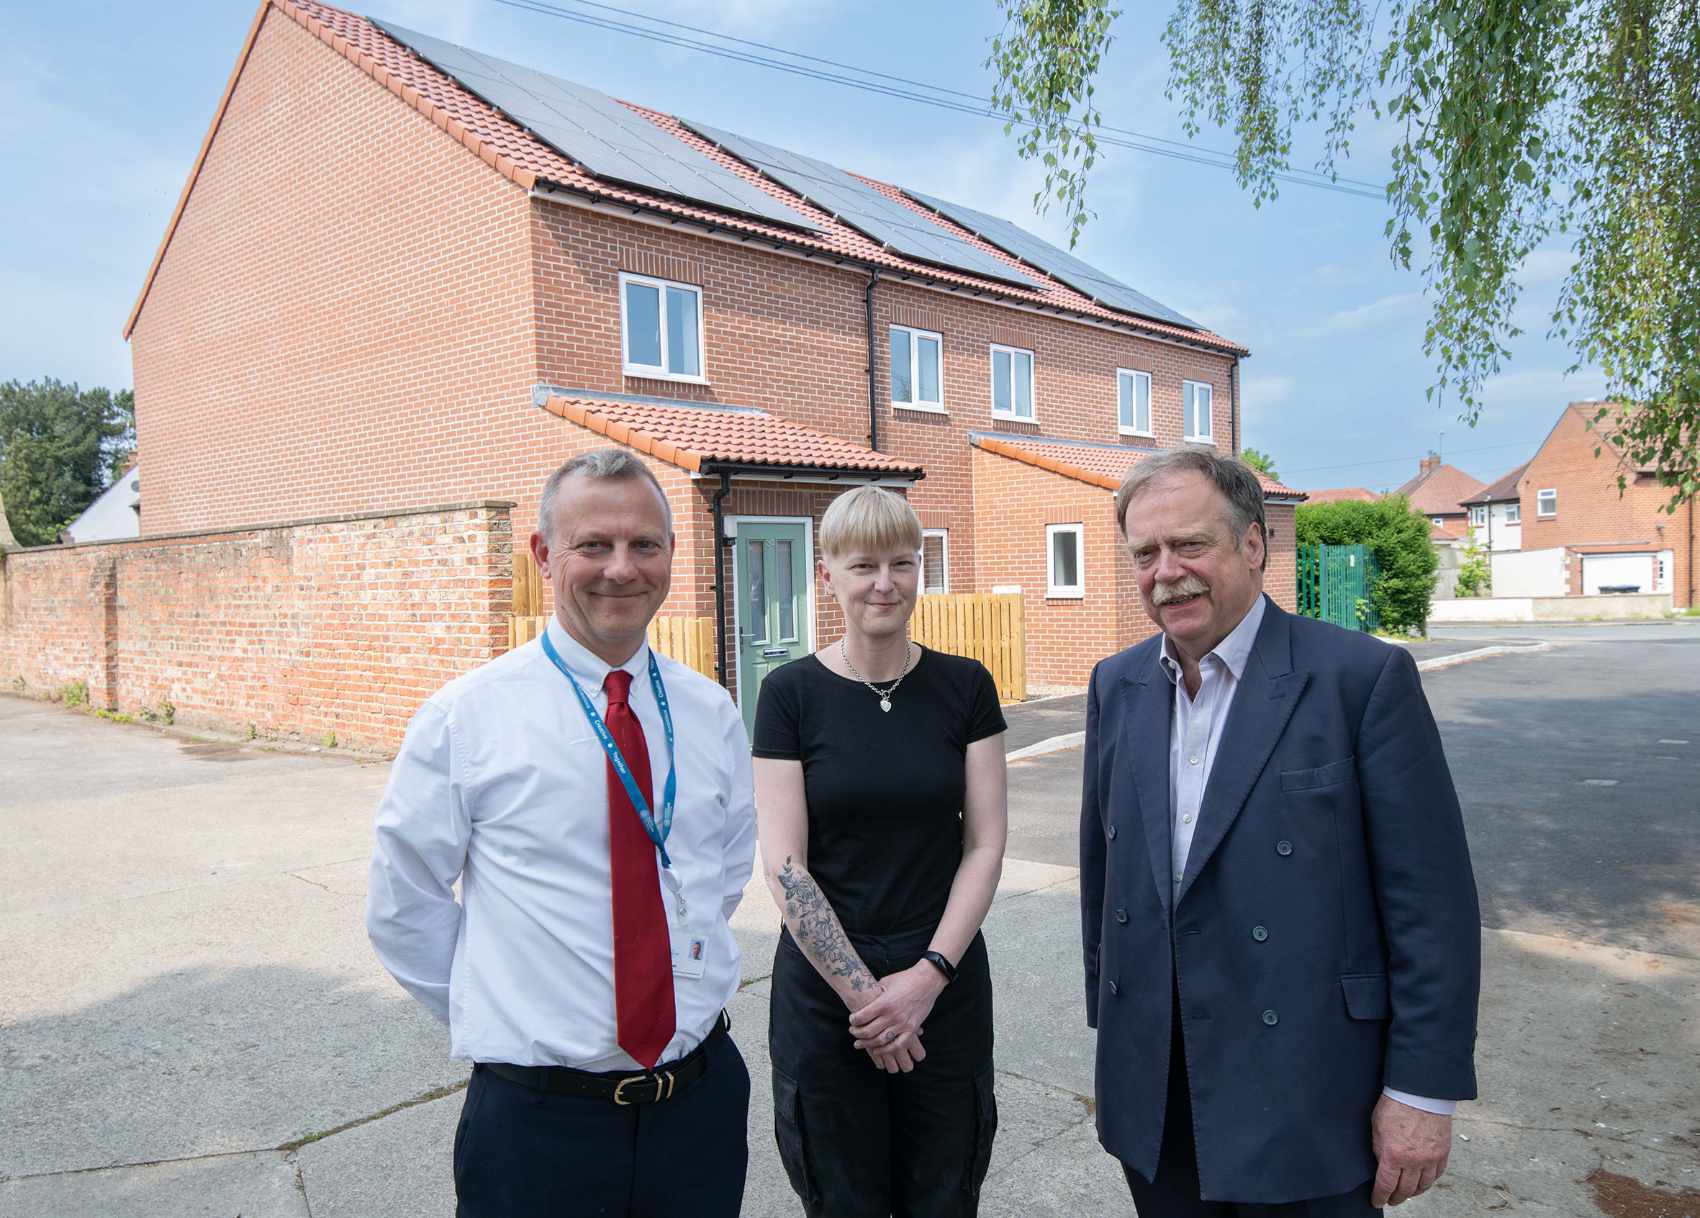 North Yorkshire Council’s executive member for housing, Cllr Simon Myers (right), Clare Edwards and North Yorkshire Council’s head of housing, Andrew Rowe, outside the new homes in Ripon